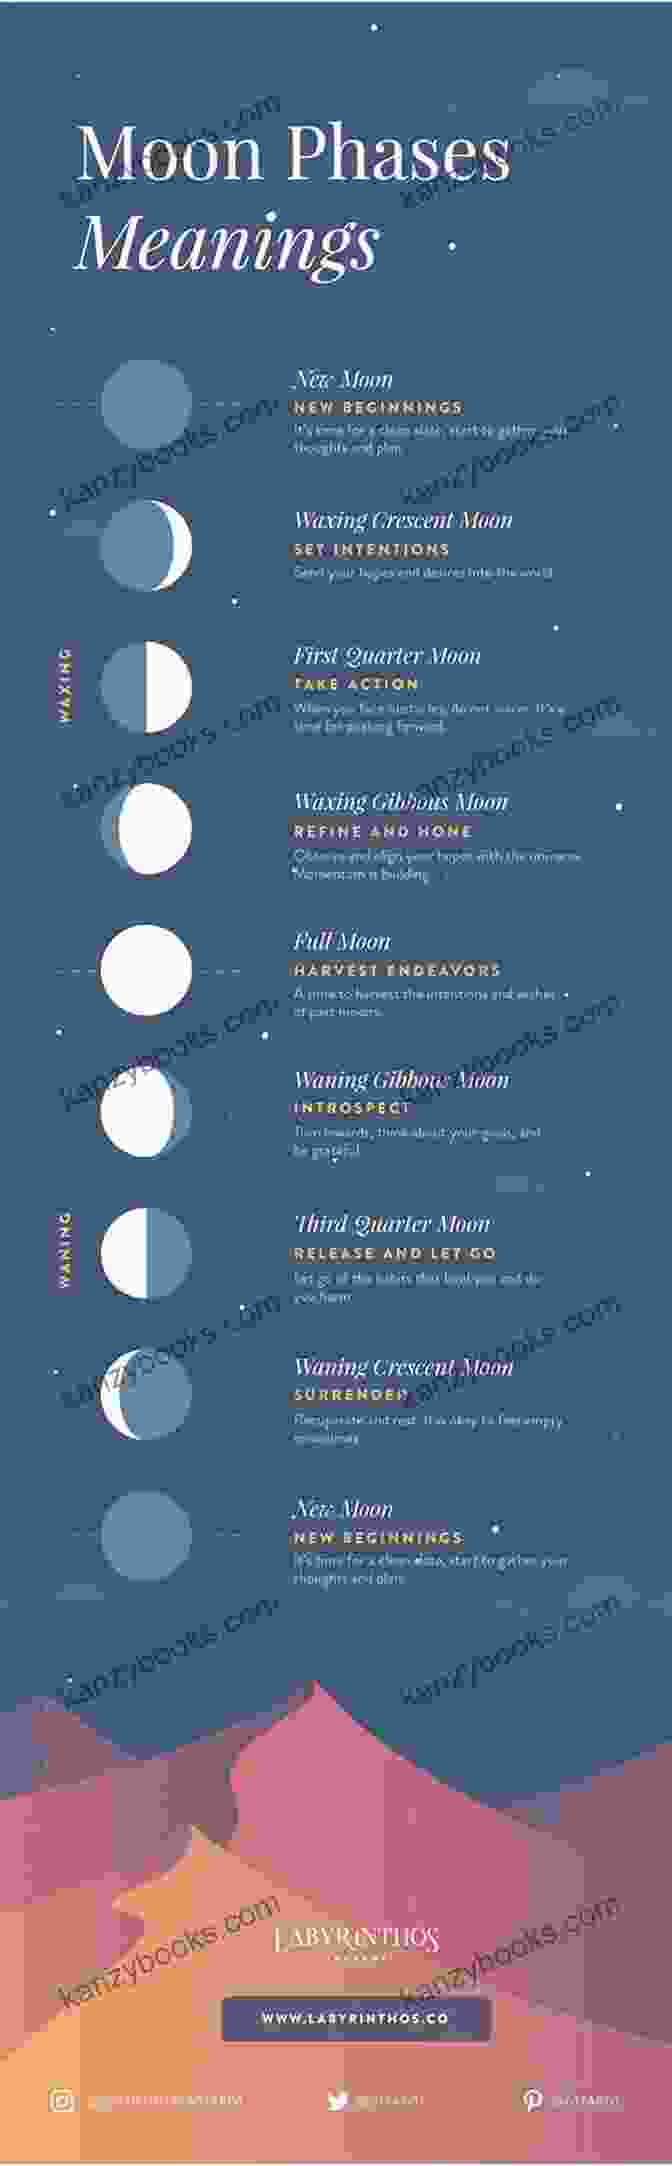 Full Moon Phase Moon Astrology: Using The Moon S Signs And Phases To Enhance Your Life